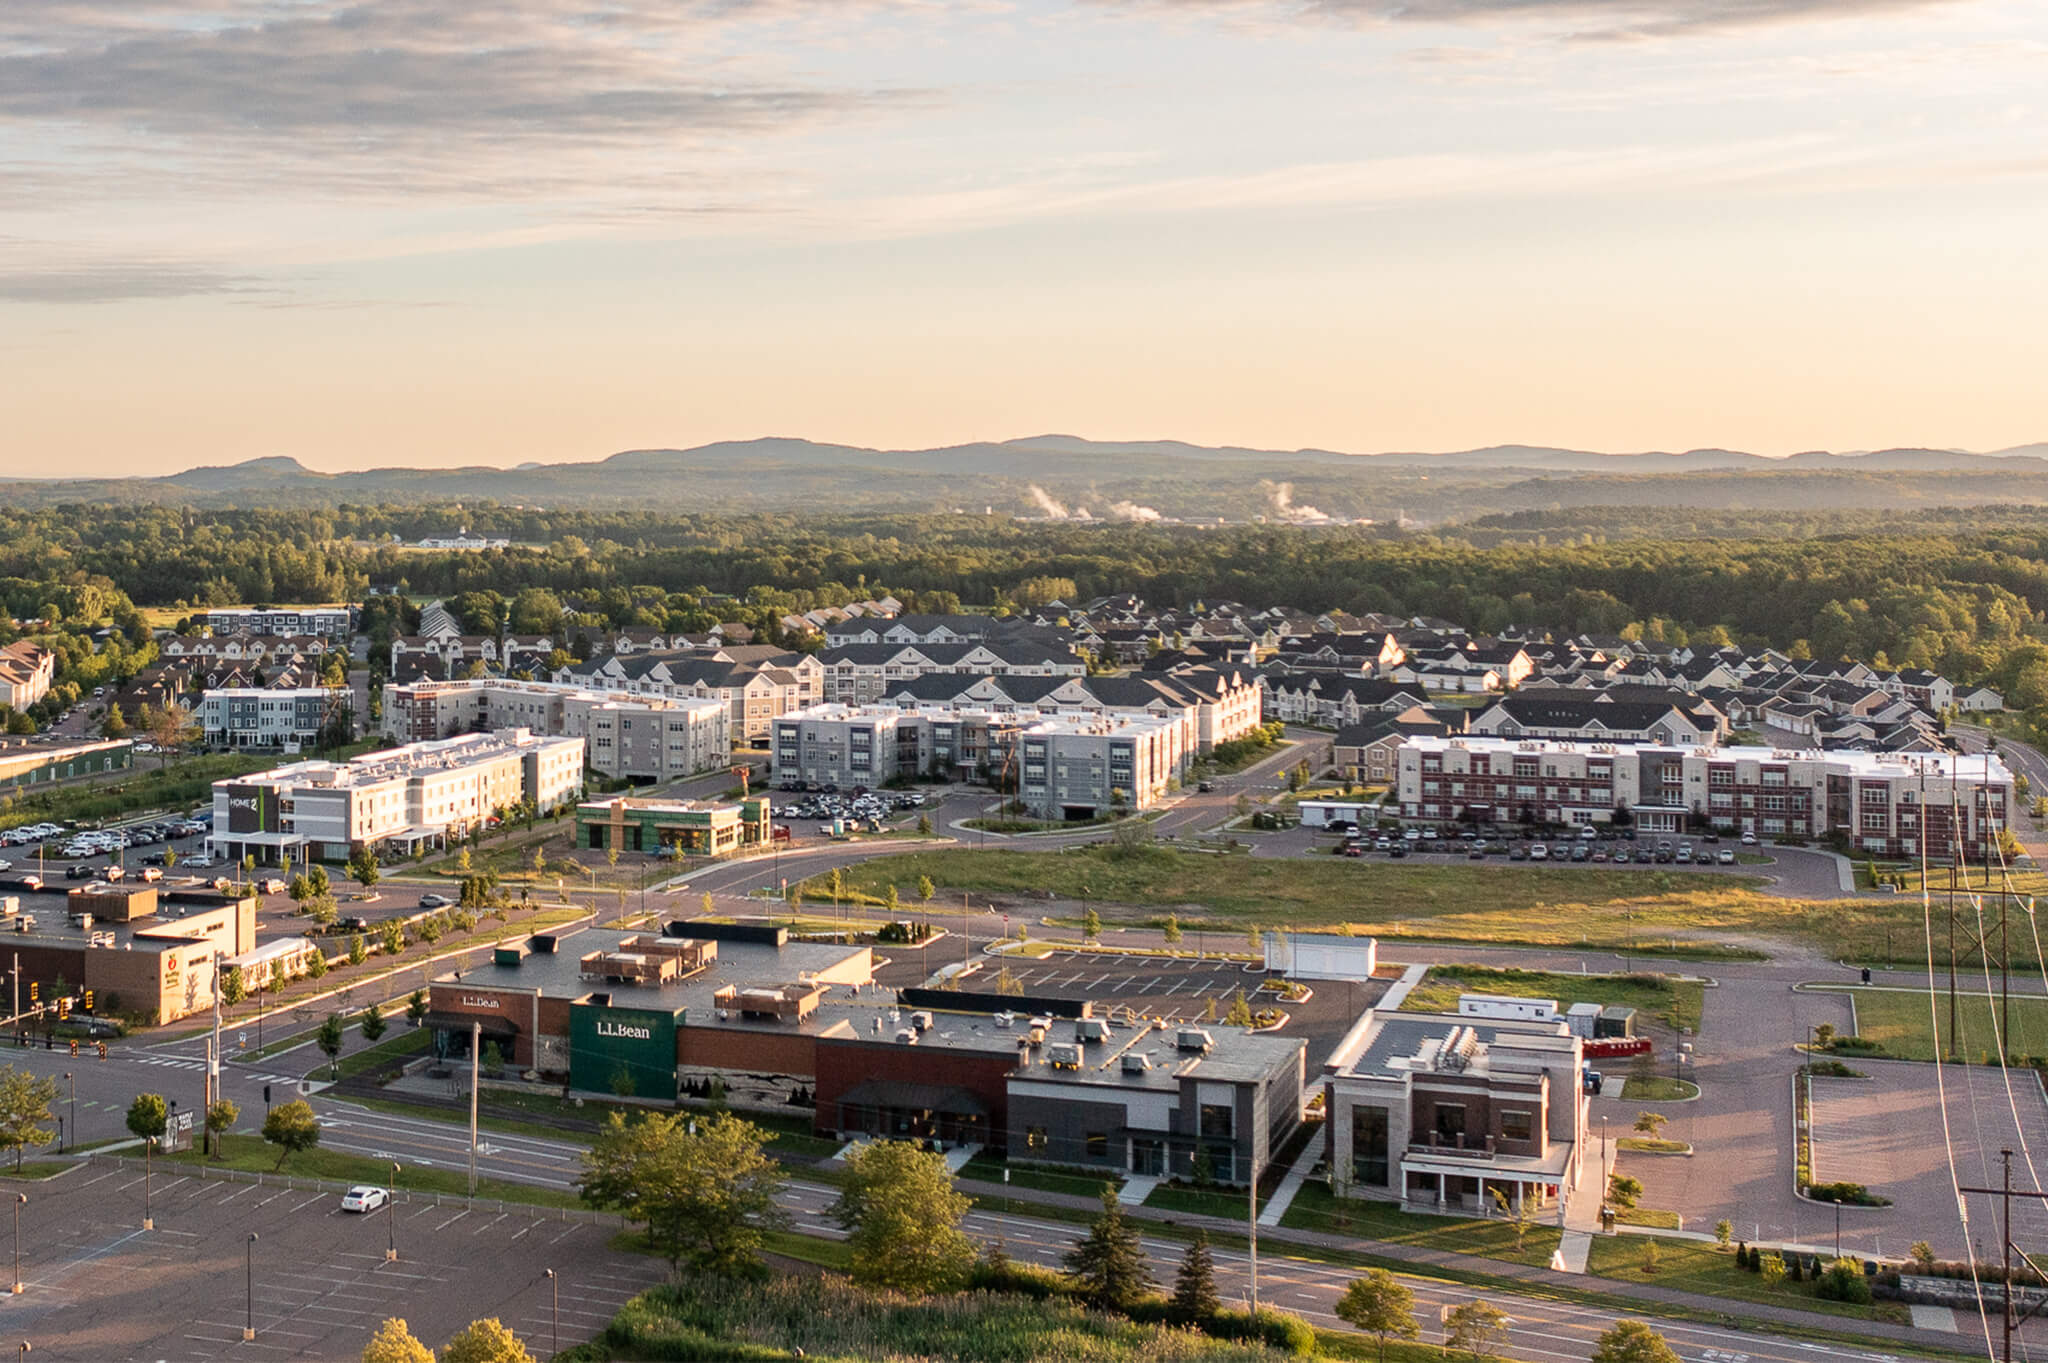 A aerial shot of finney crossing apartments with the mountains in the background during sunset